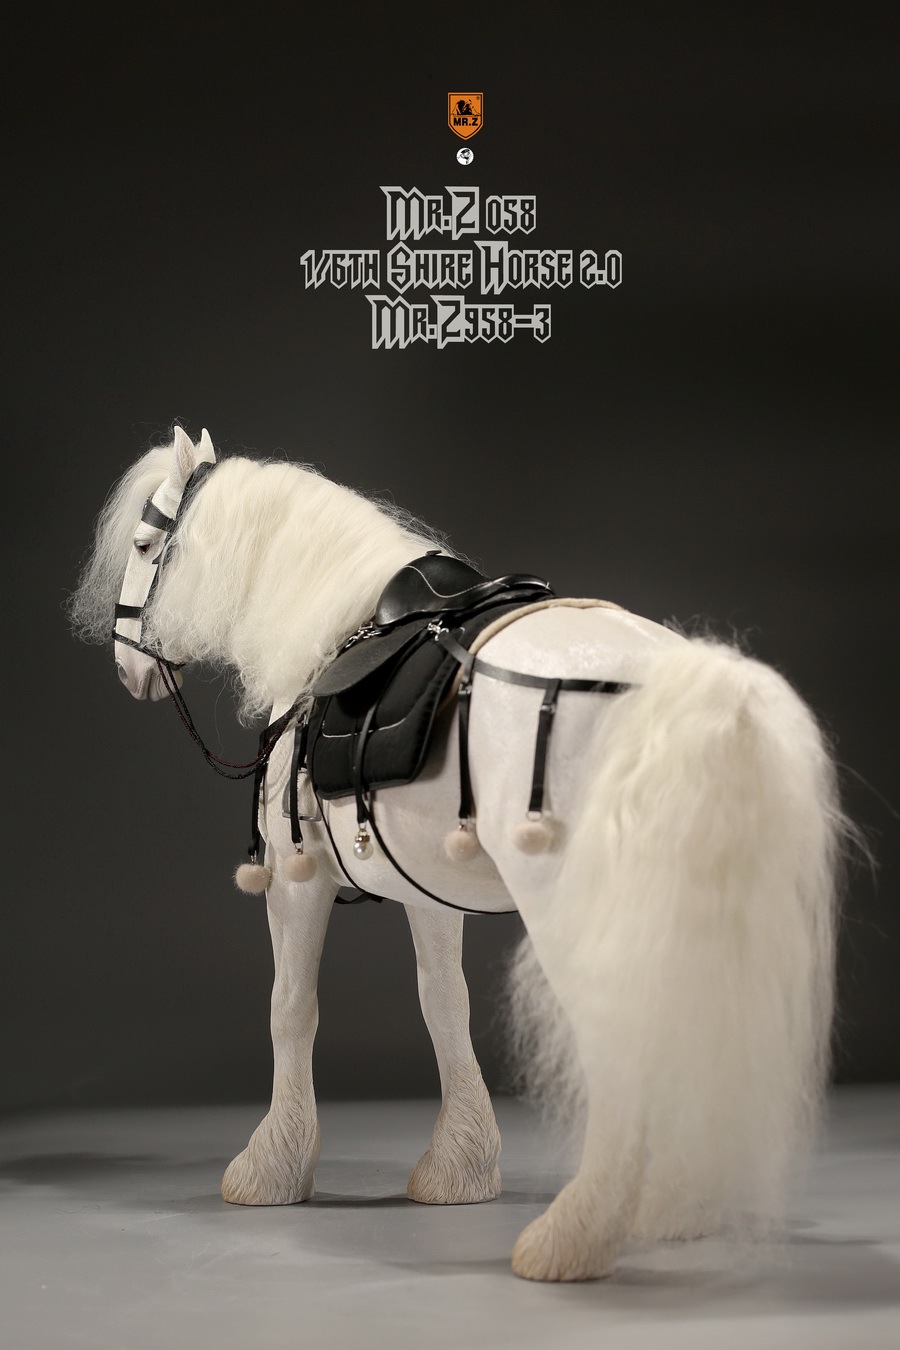 Mr - NEW PRODUCT: MR. Z: 58th round-Shire Horse 2.0 version full set of 5 colors  08575312